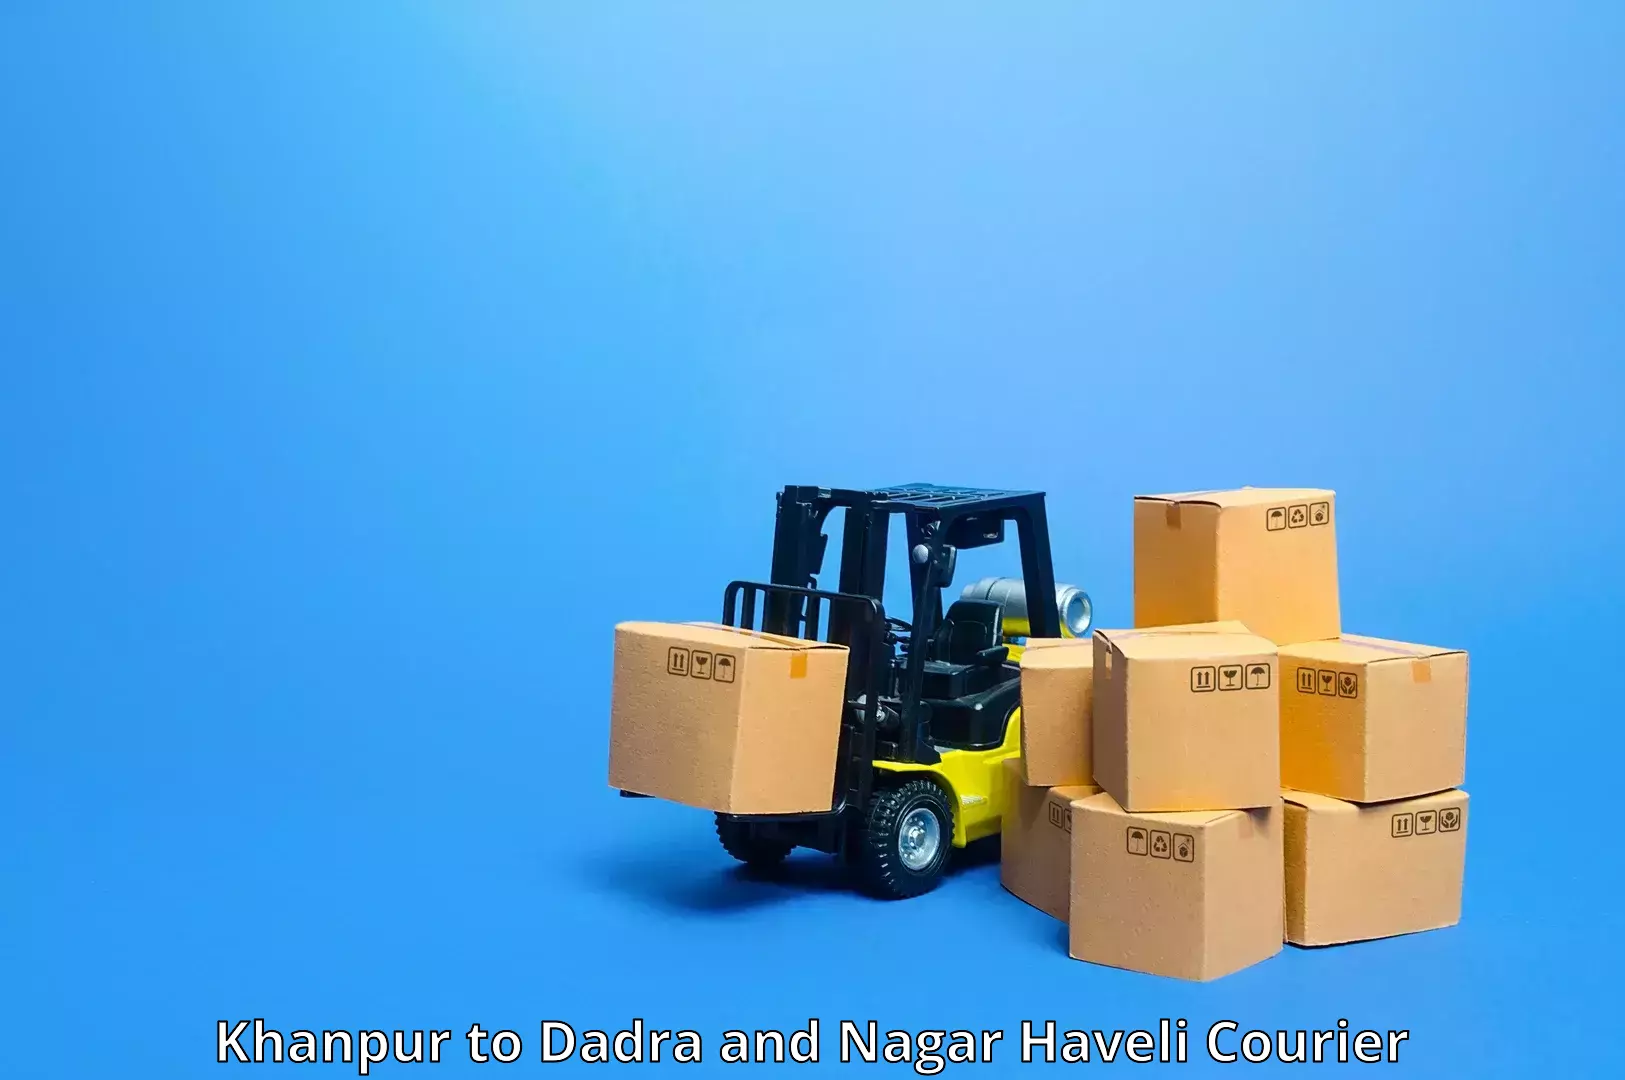 Advanced parcel tracking in Khanpur to Dadra and Nagar Haveli